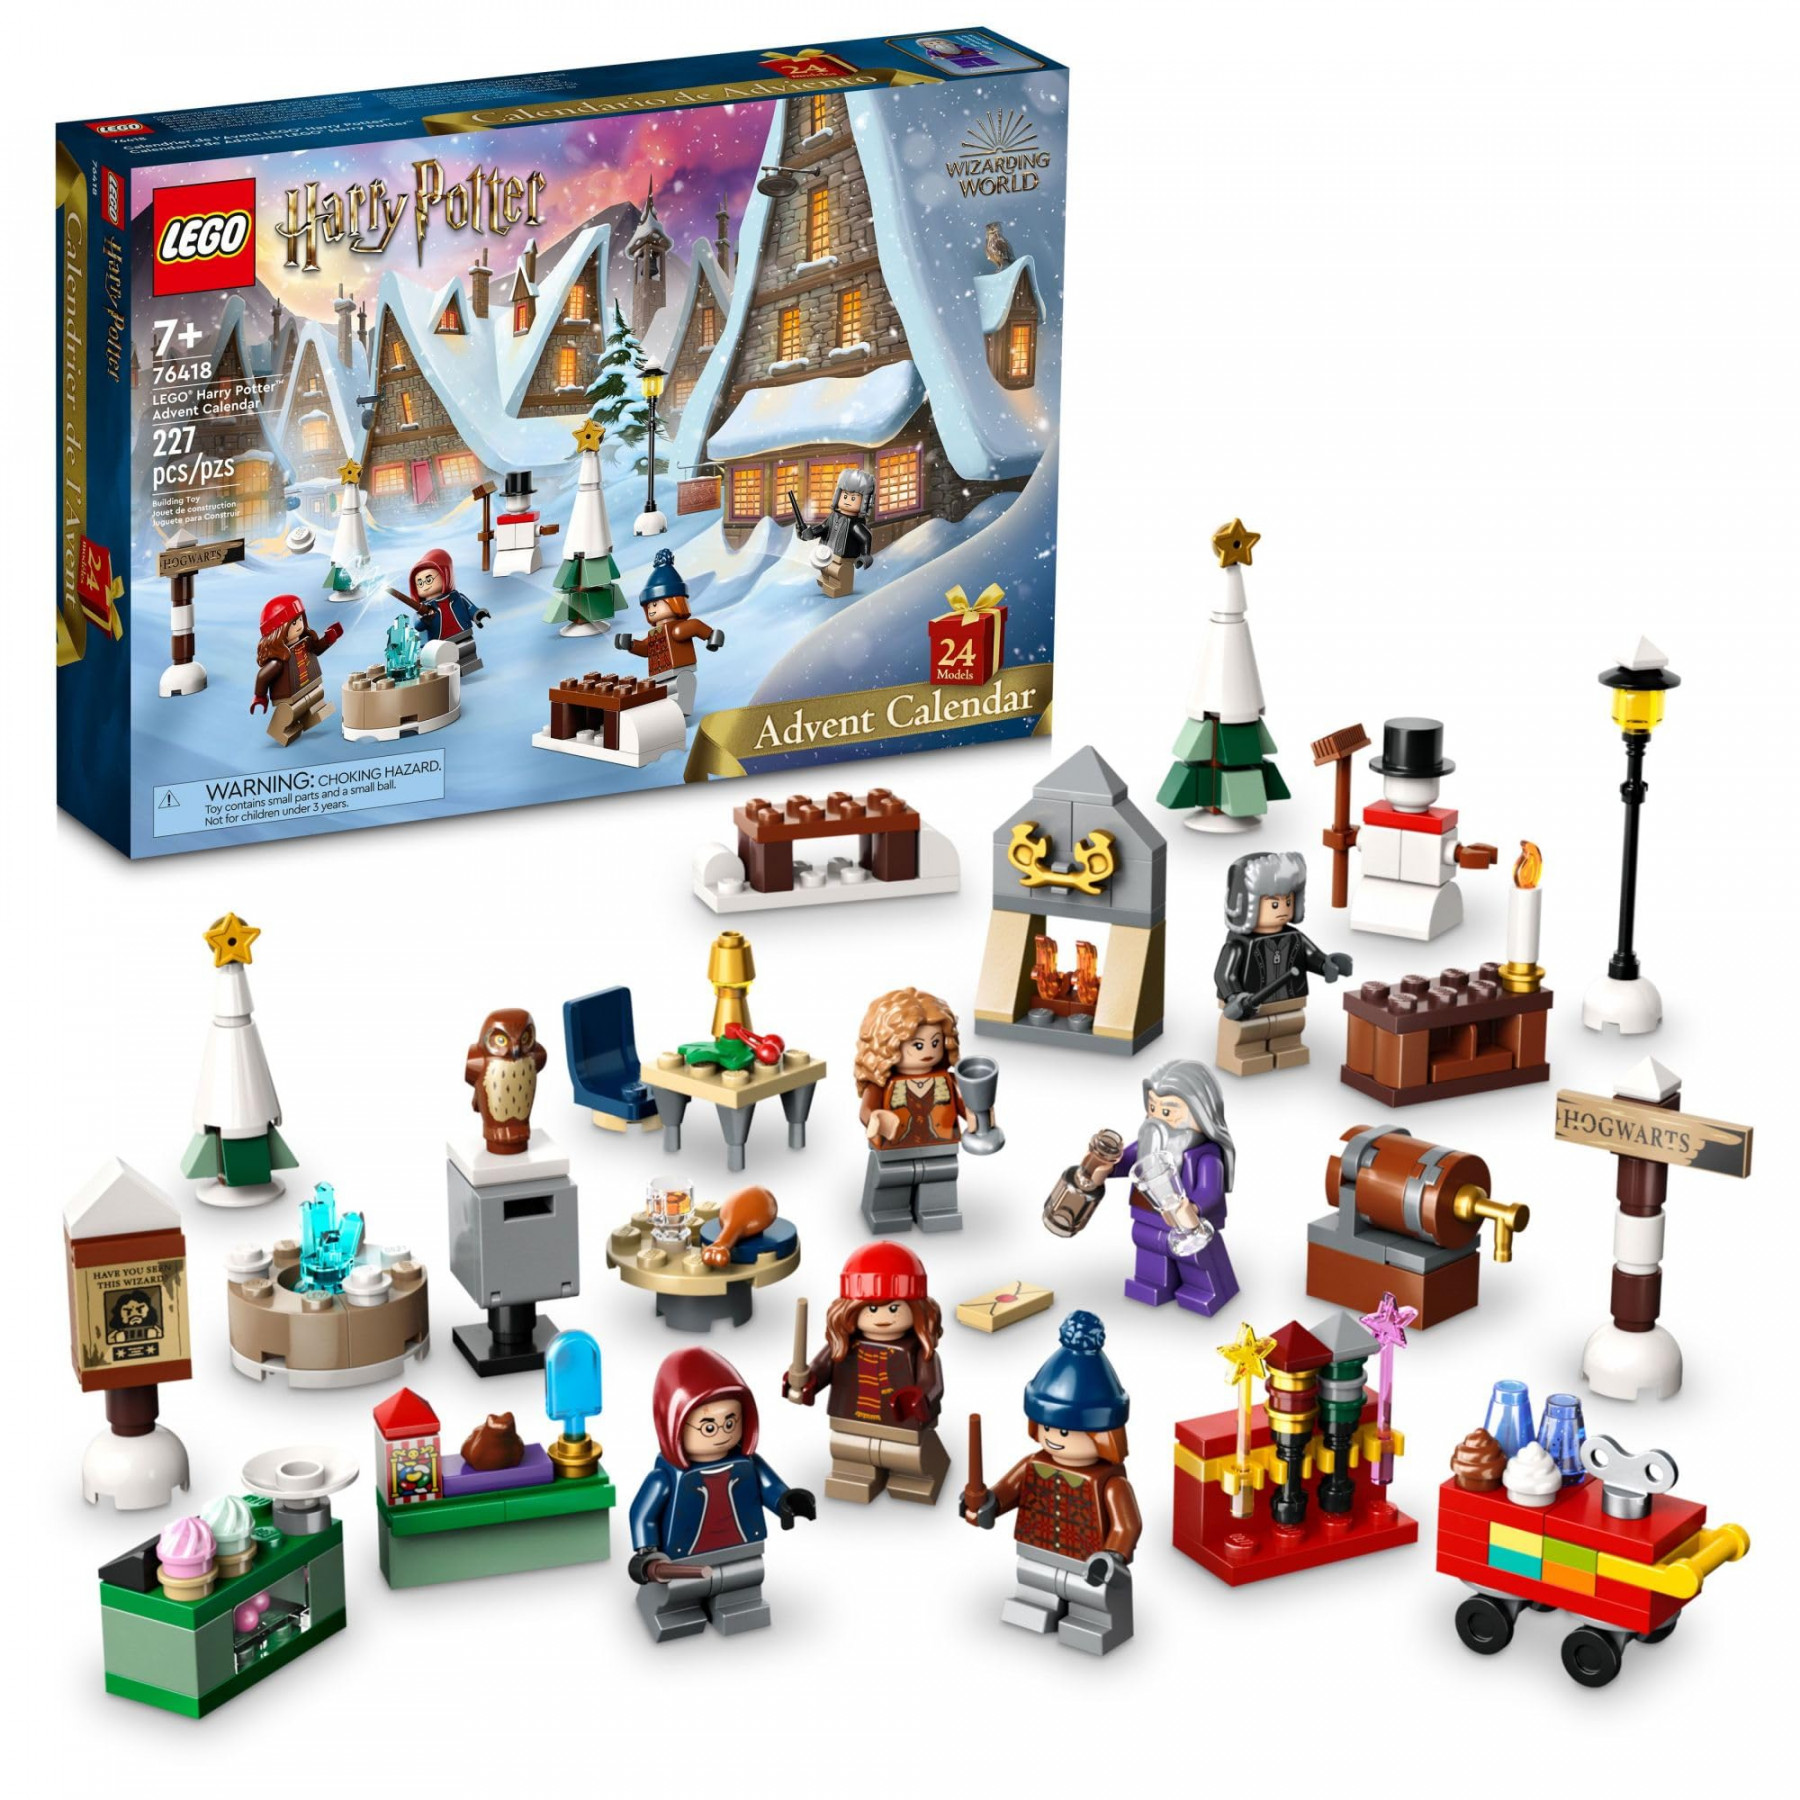 LEGO Harry Potter  Advent Calendar  Christmas Countdown Playset  with Daily Suprises, Discover New Experiences with this Holiday Gift